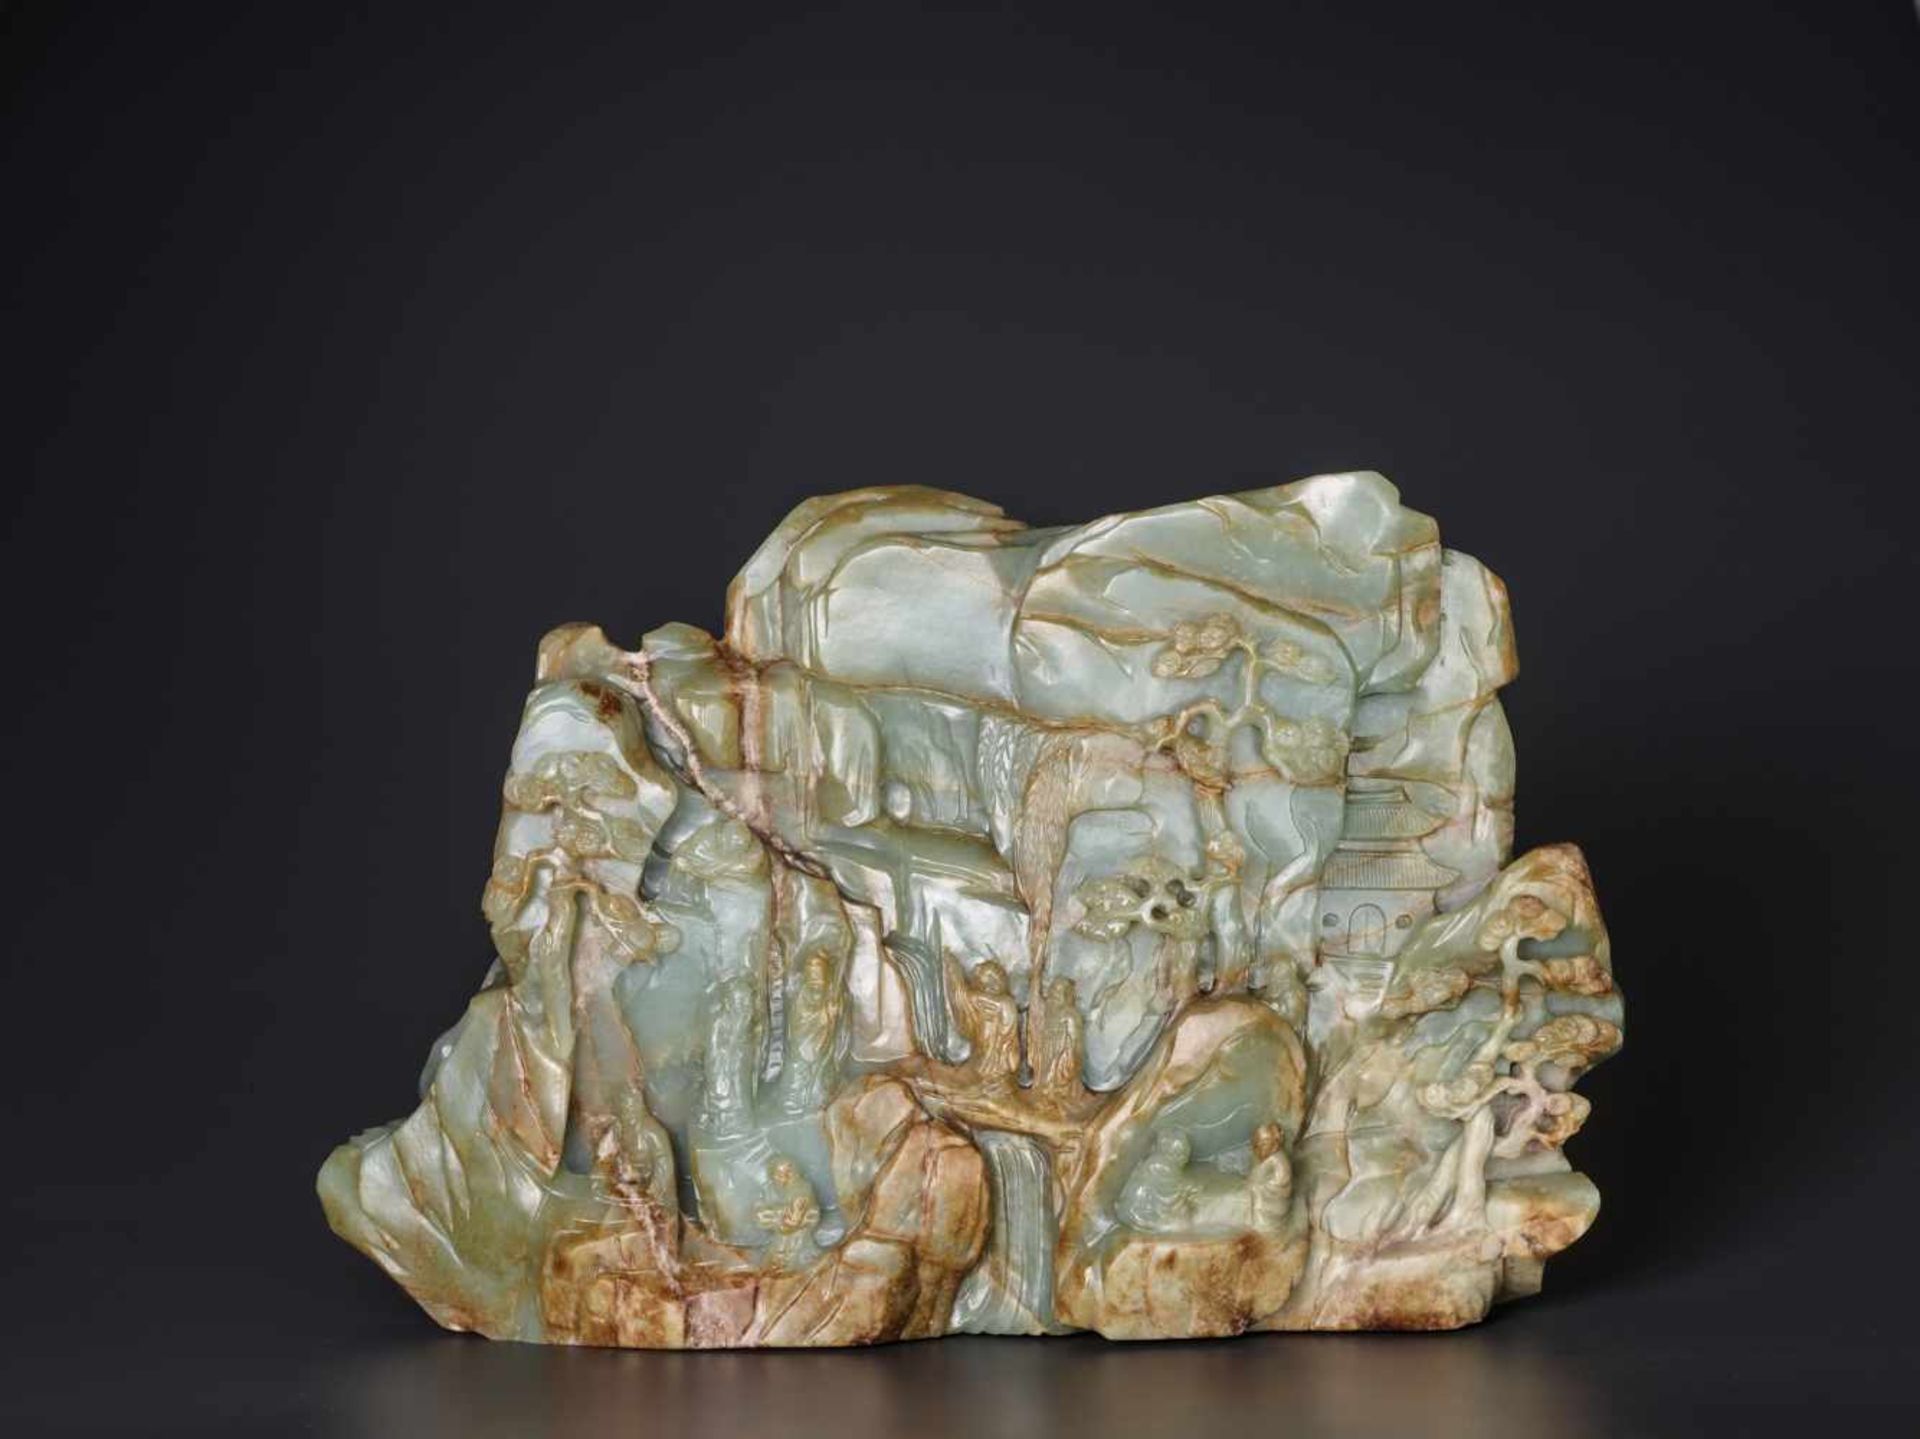 A SUPERB AND VERY LARGE CELADON AND RUSSET ‘SEVEN IMMORTALS’ JADE MOUNTAIN, 17th – 18th CENTURY